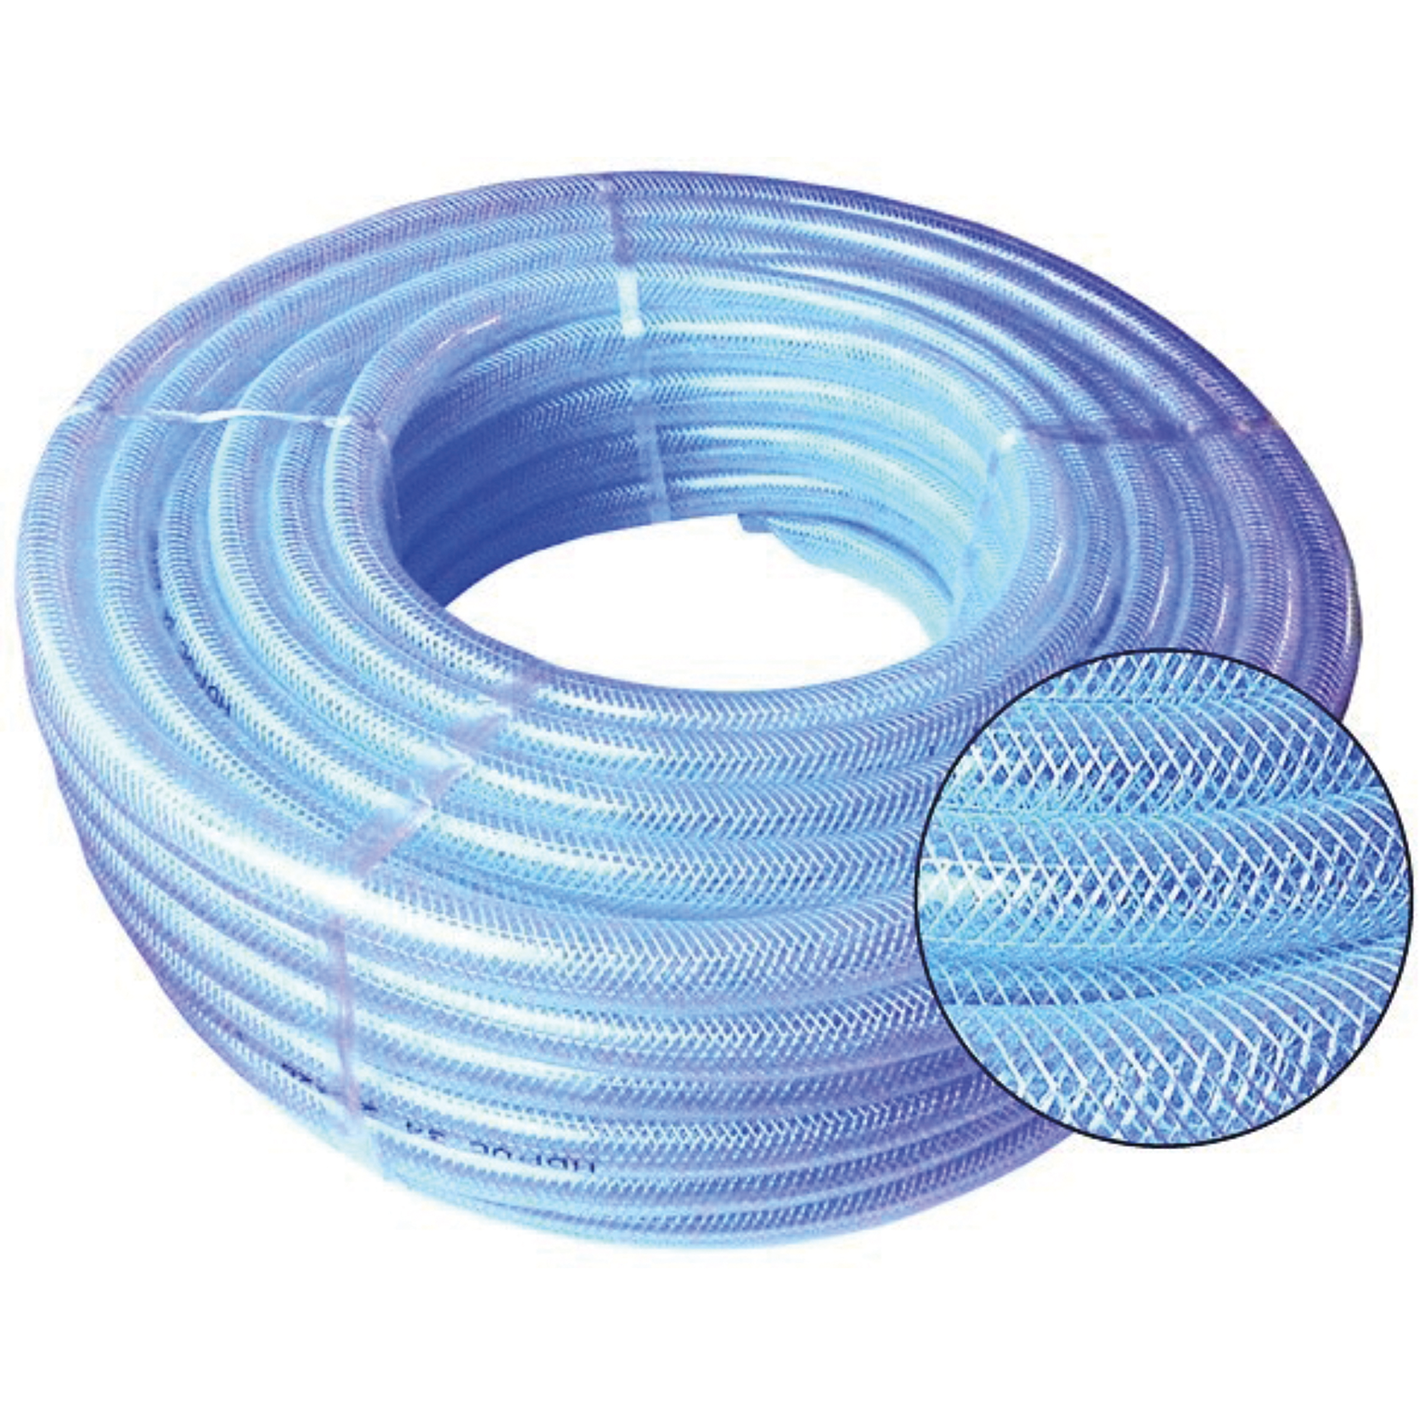 1/2" Braided Reinforced PVC, Clear